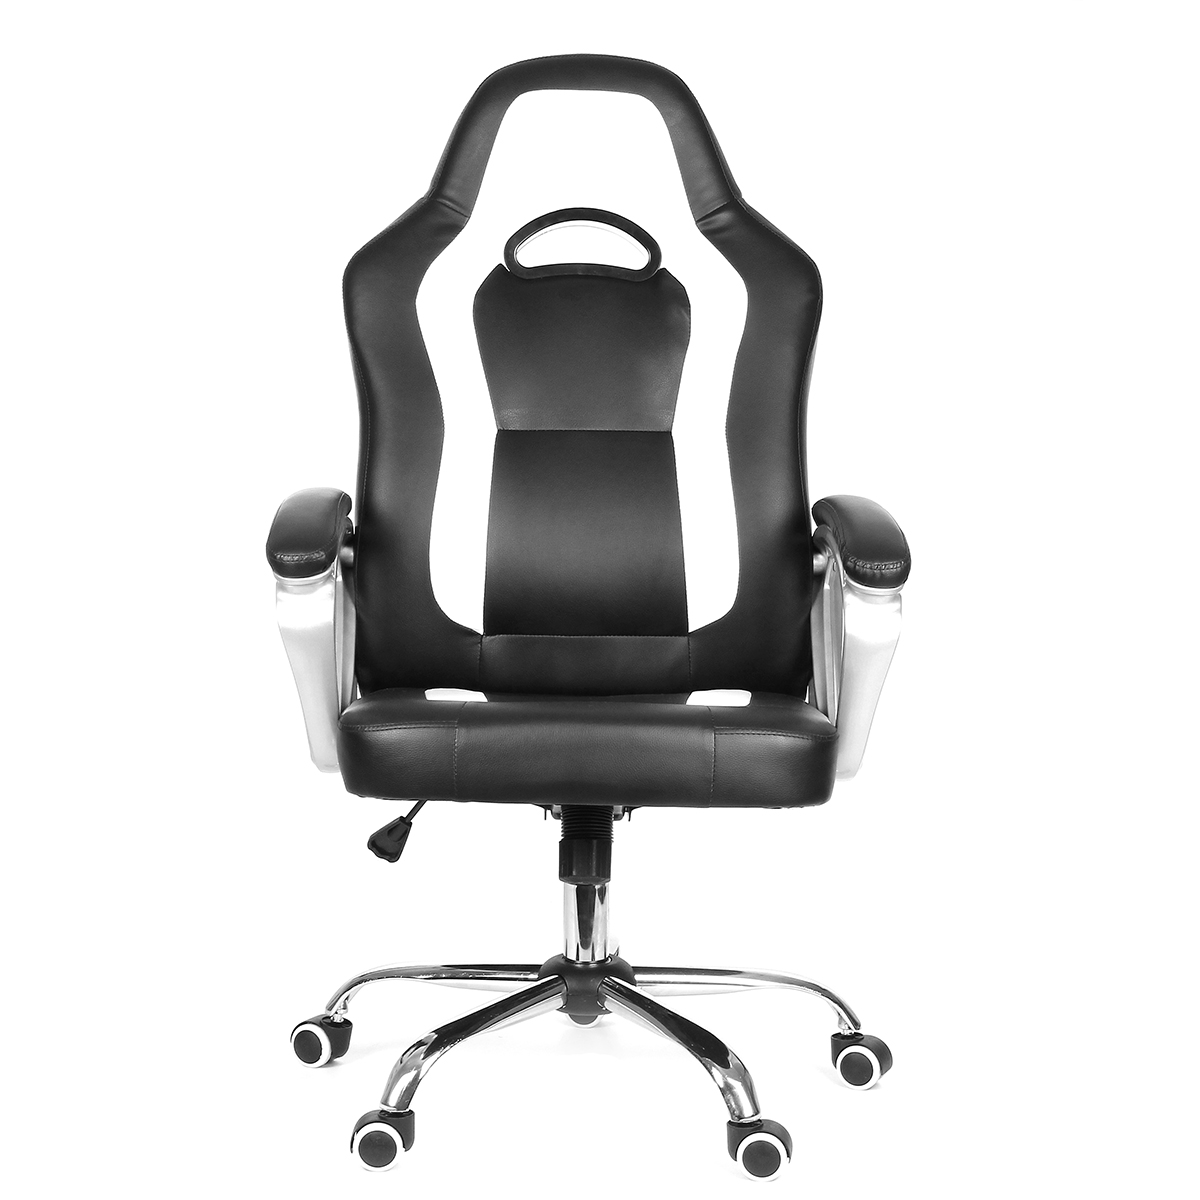 

Ergonomic High Back Reclining Office Boss Executive Chair Adjustable Height Rotating Lift Chair PU Leather Gaming Chair Laptop Desk Chair